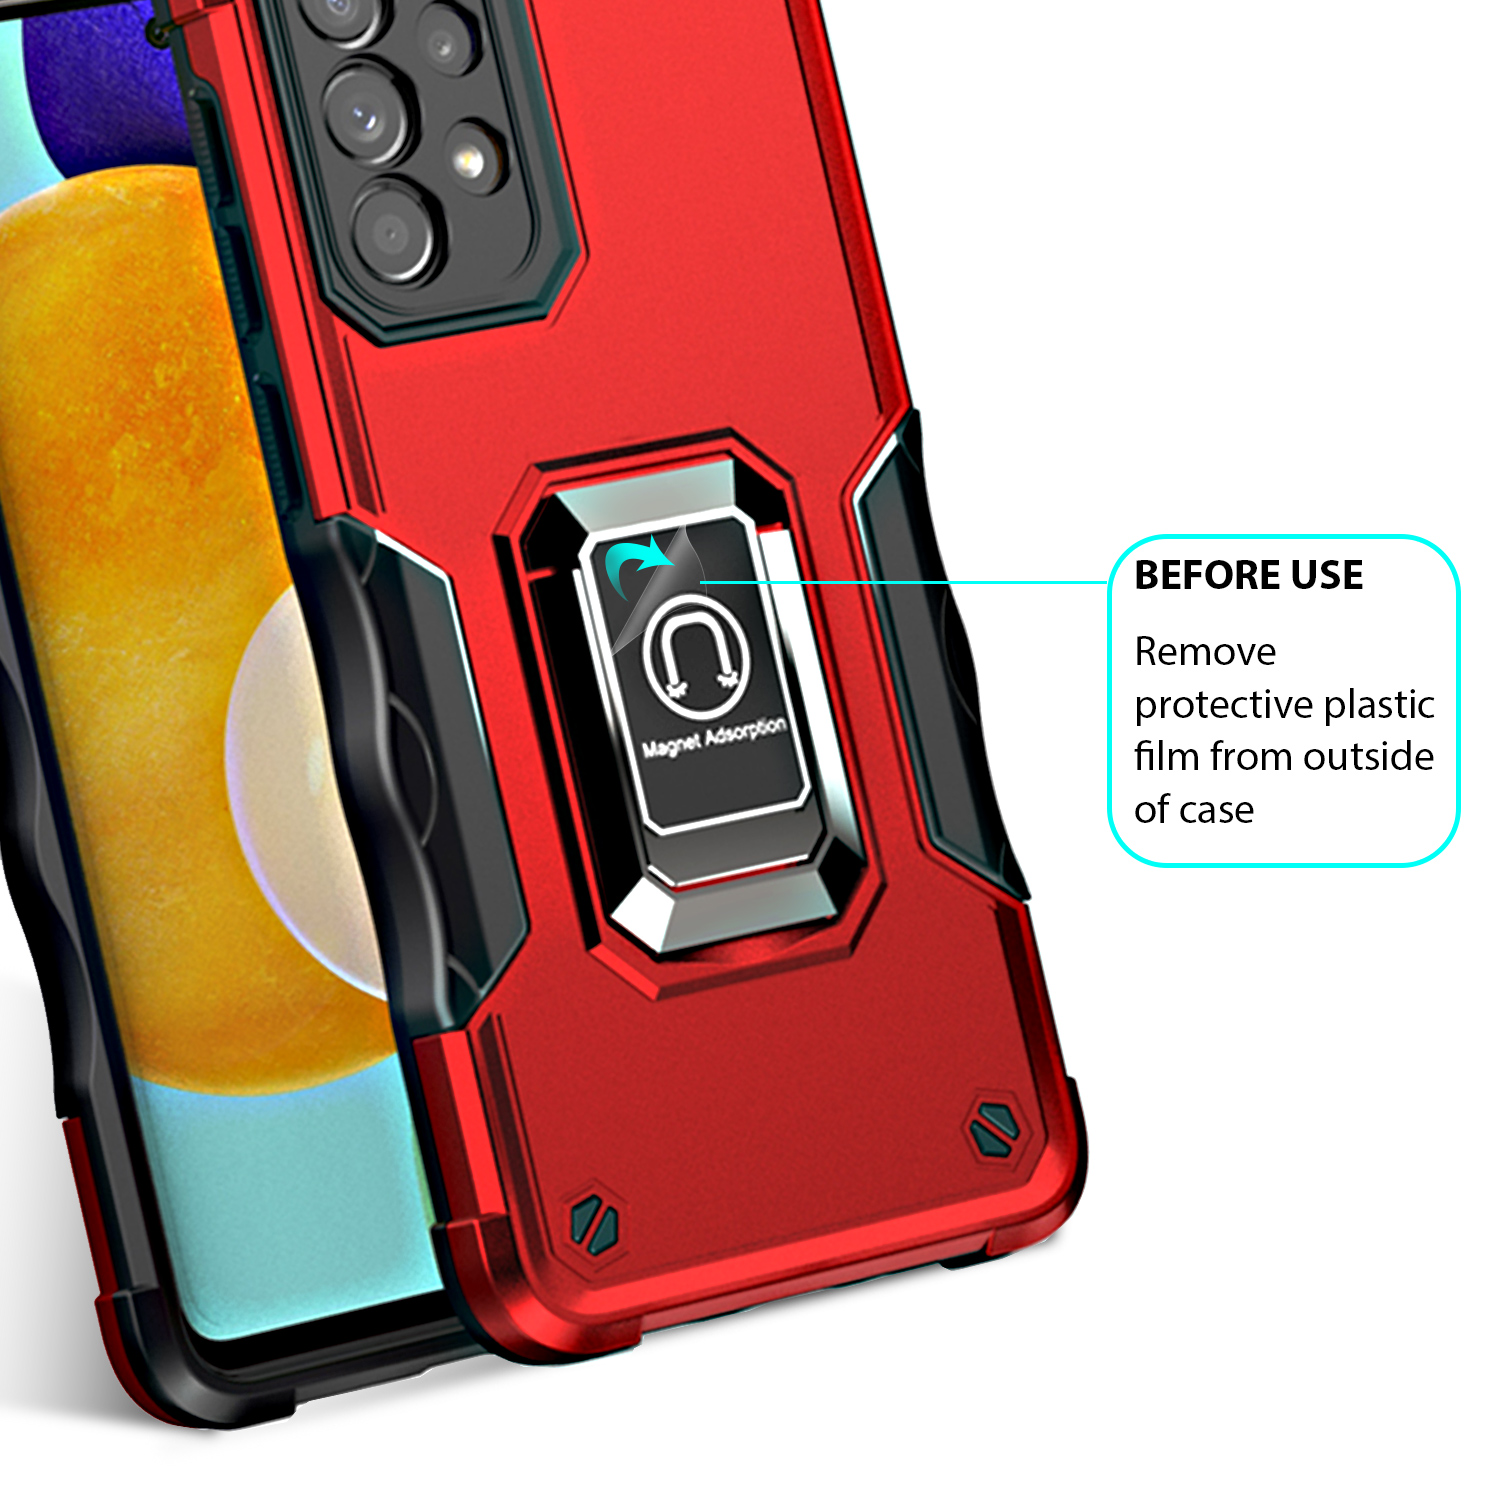 TJS for Samsung Galaxy A15 5G Phone Case, with Tempered Glass Screen Protector, [Military Grade] Heavy Duty Magnetic Support Ring Kickstand Cover for Galaxy A15 5G (Red) - image 5 of 8